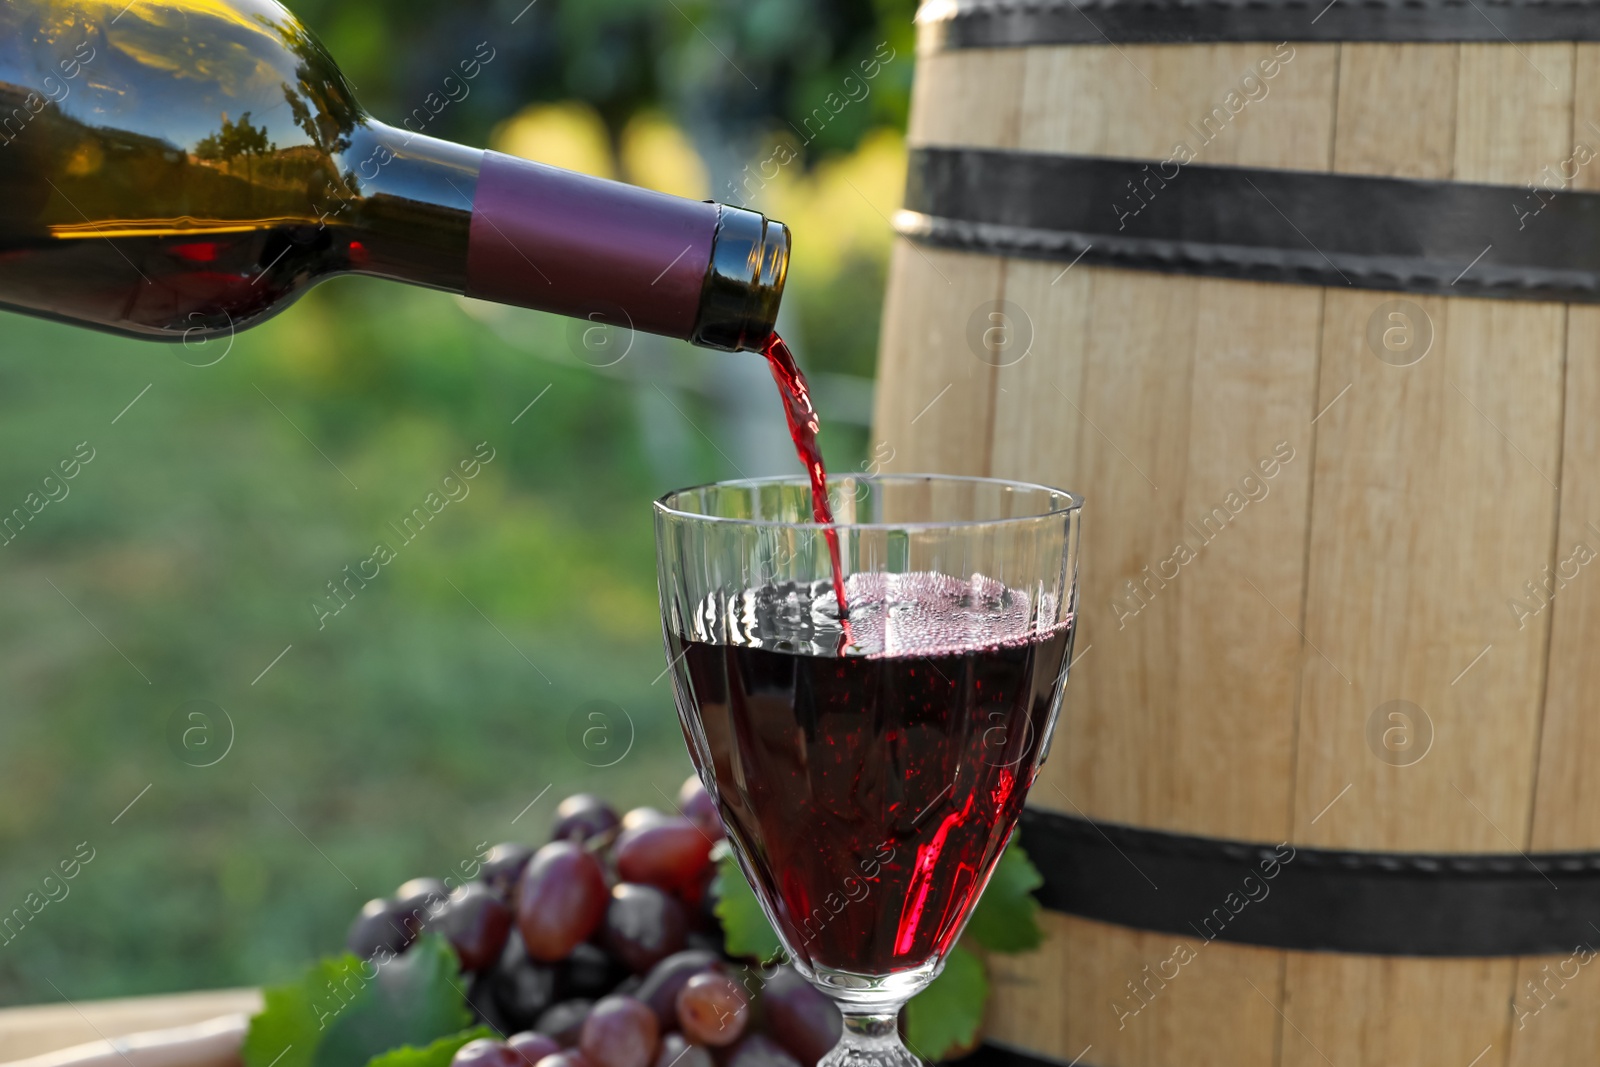 Photo of Pouring wine from bottle into glass in vineyard, closeup